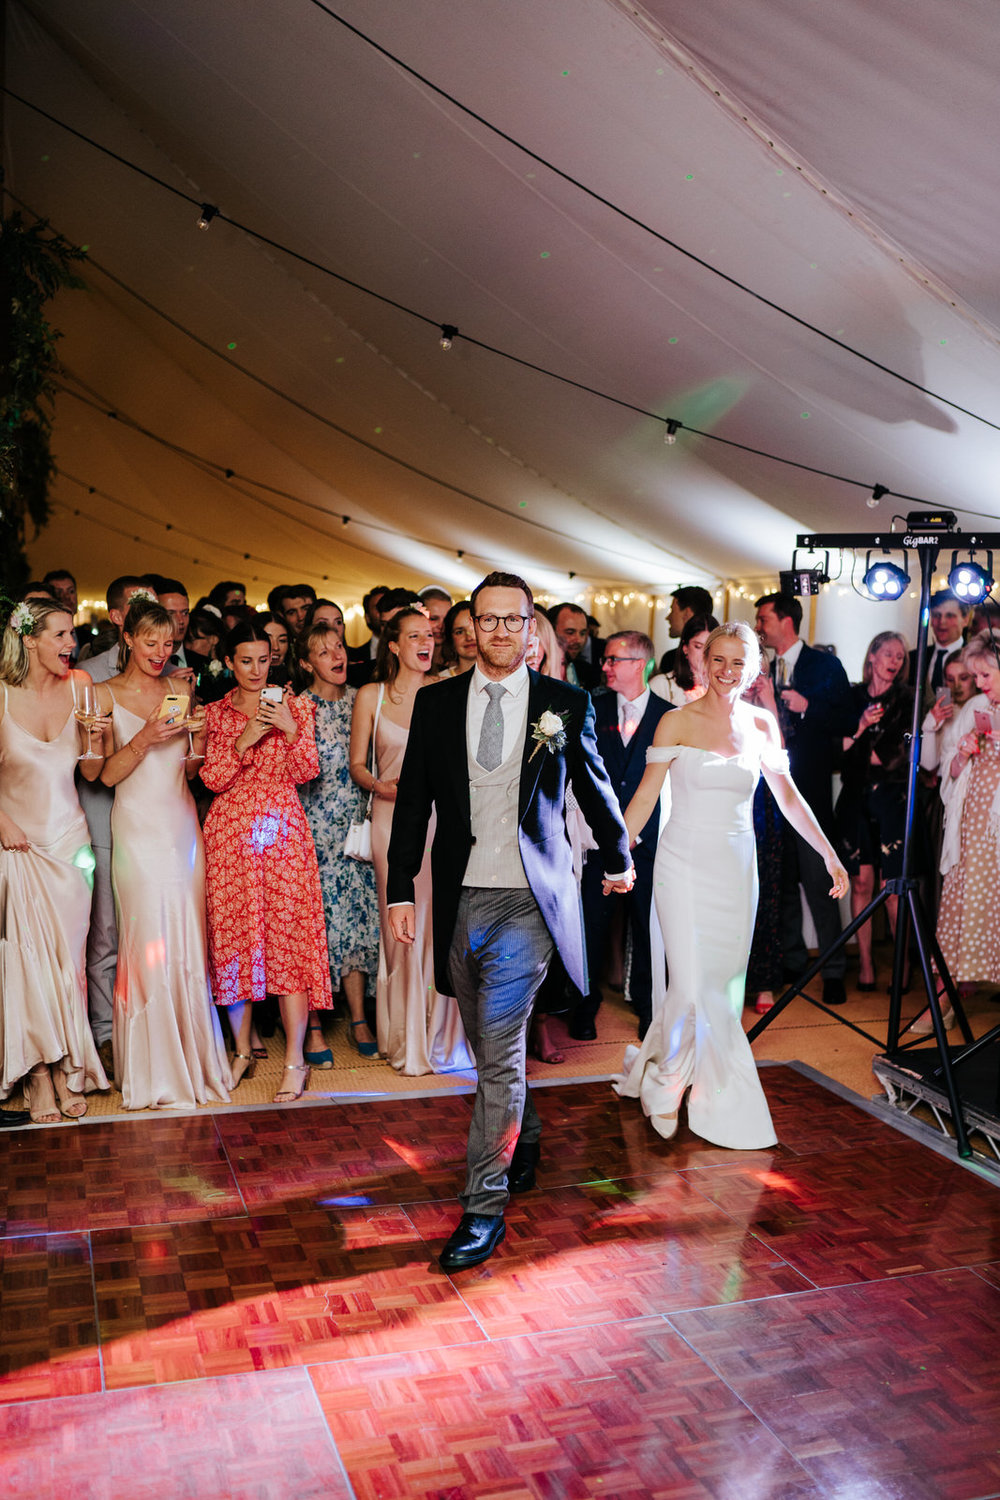  Bride and groom hold hands and walk onto dancefloor to have their first dance 